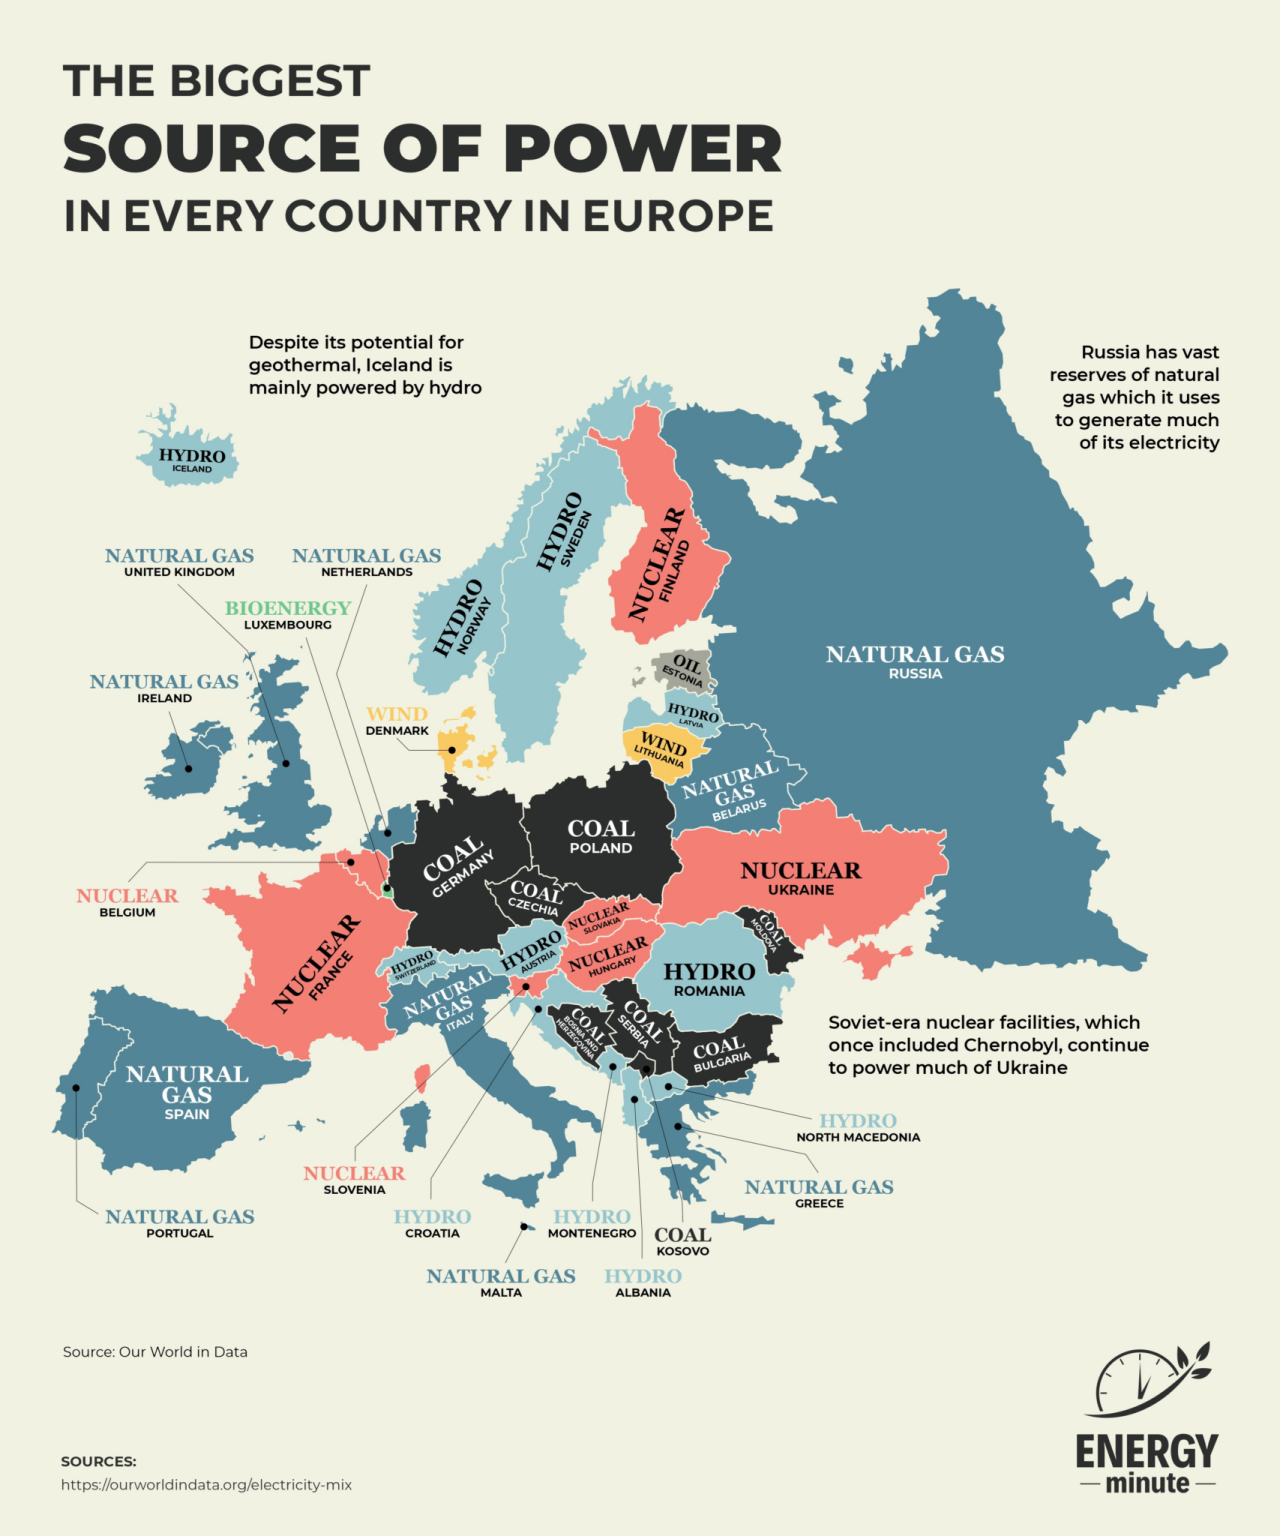 mapsontheweb: “The Top Sources of Electricity in Europe by Country by u/NoComplaint1281 ”